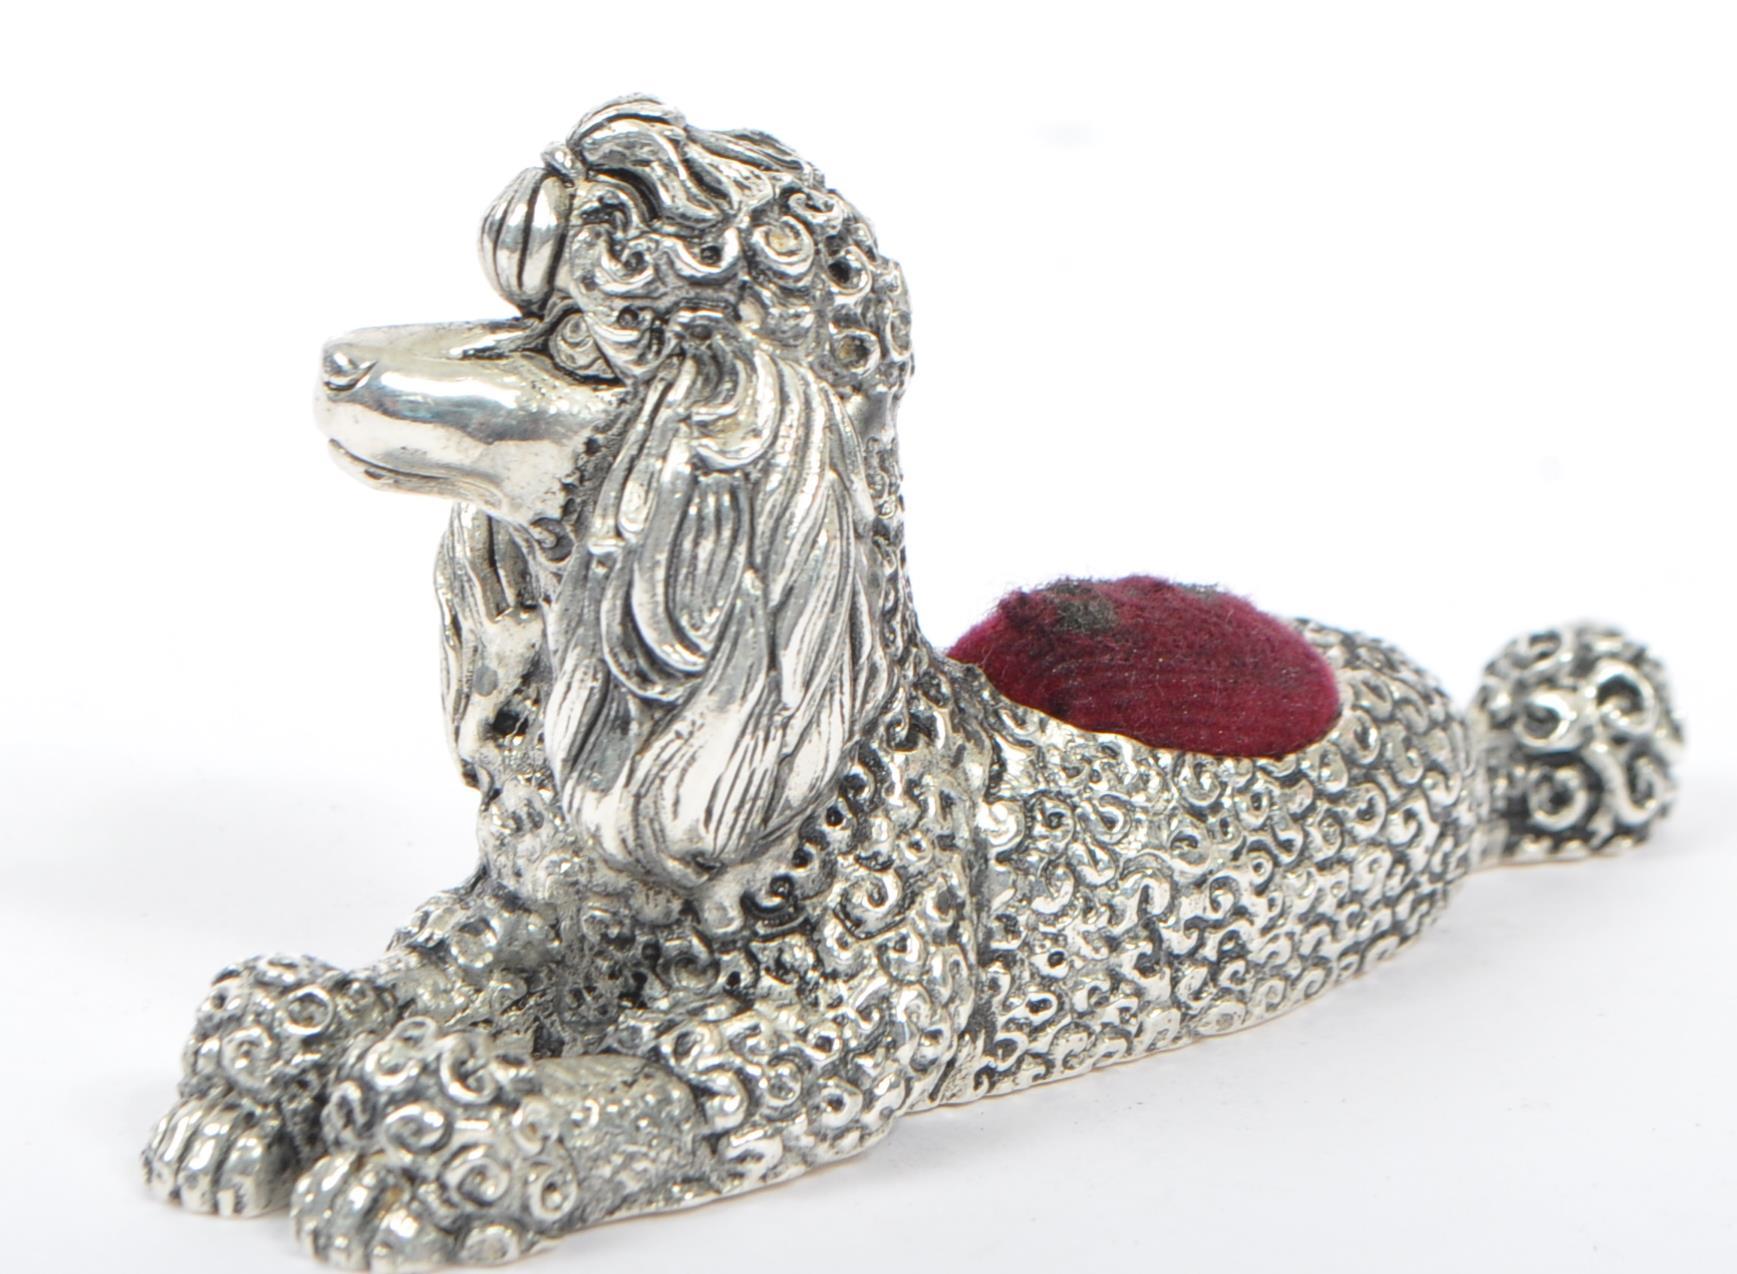 SILVER PLATED POODLE DOG PIN CUSHIONS - Image 2 of 4